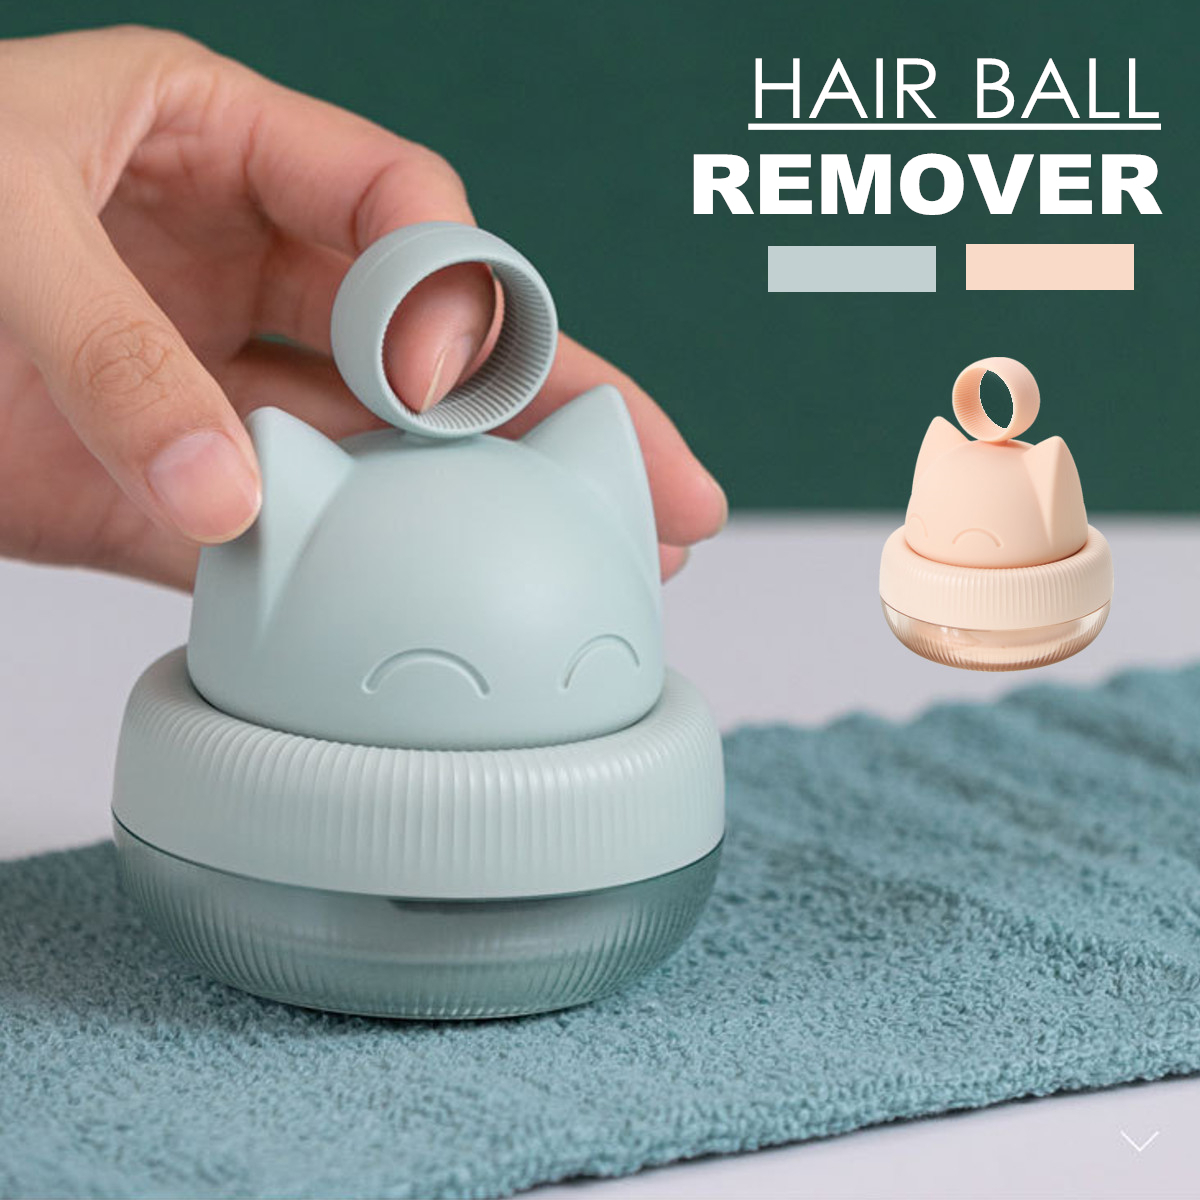 Poratble-Mini-Electric-Hair-Ball-Remover-USB-Rechargeable-Clothes-Fluff-Remover-Sweater-Fuzz-Shaver-1595886-1